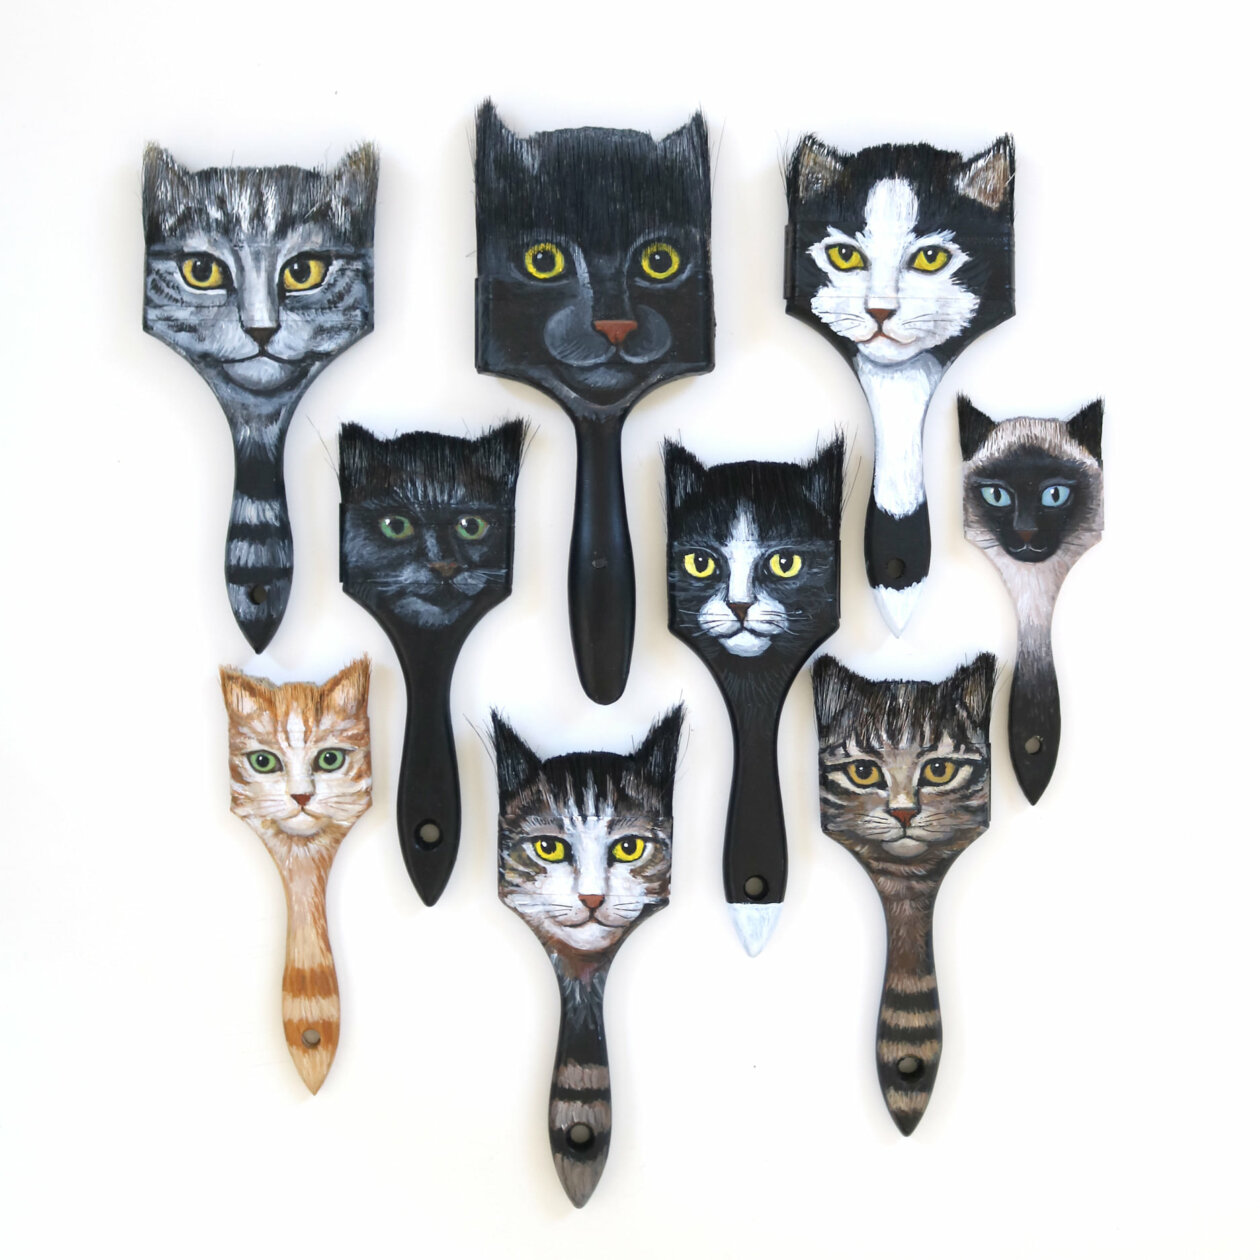 Old Household Objects Turned Into Incredible Art Pieces By Alexandra Dillon 6